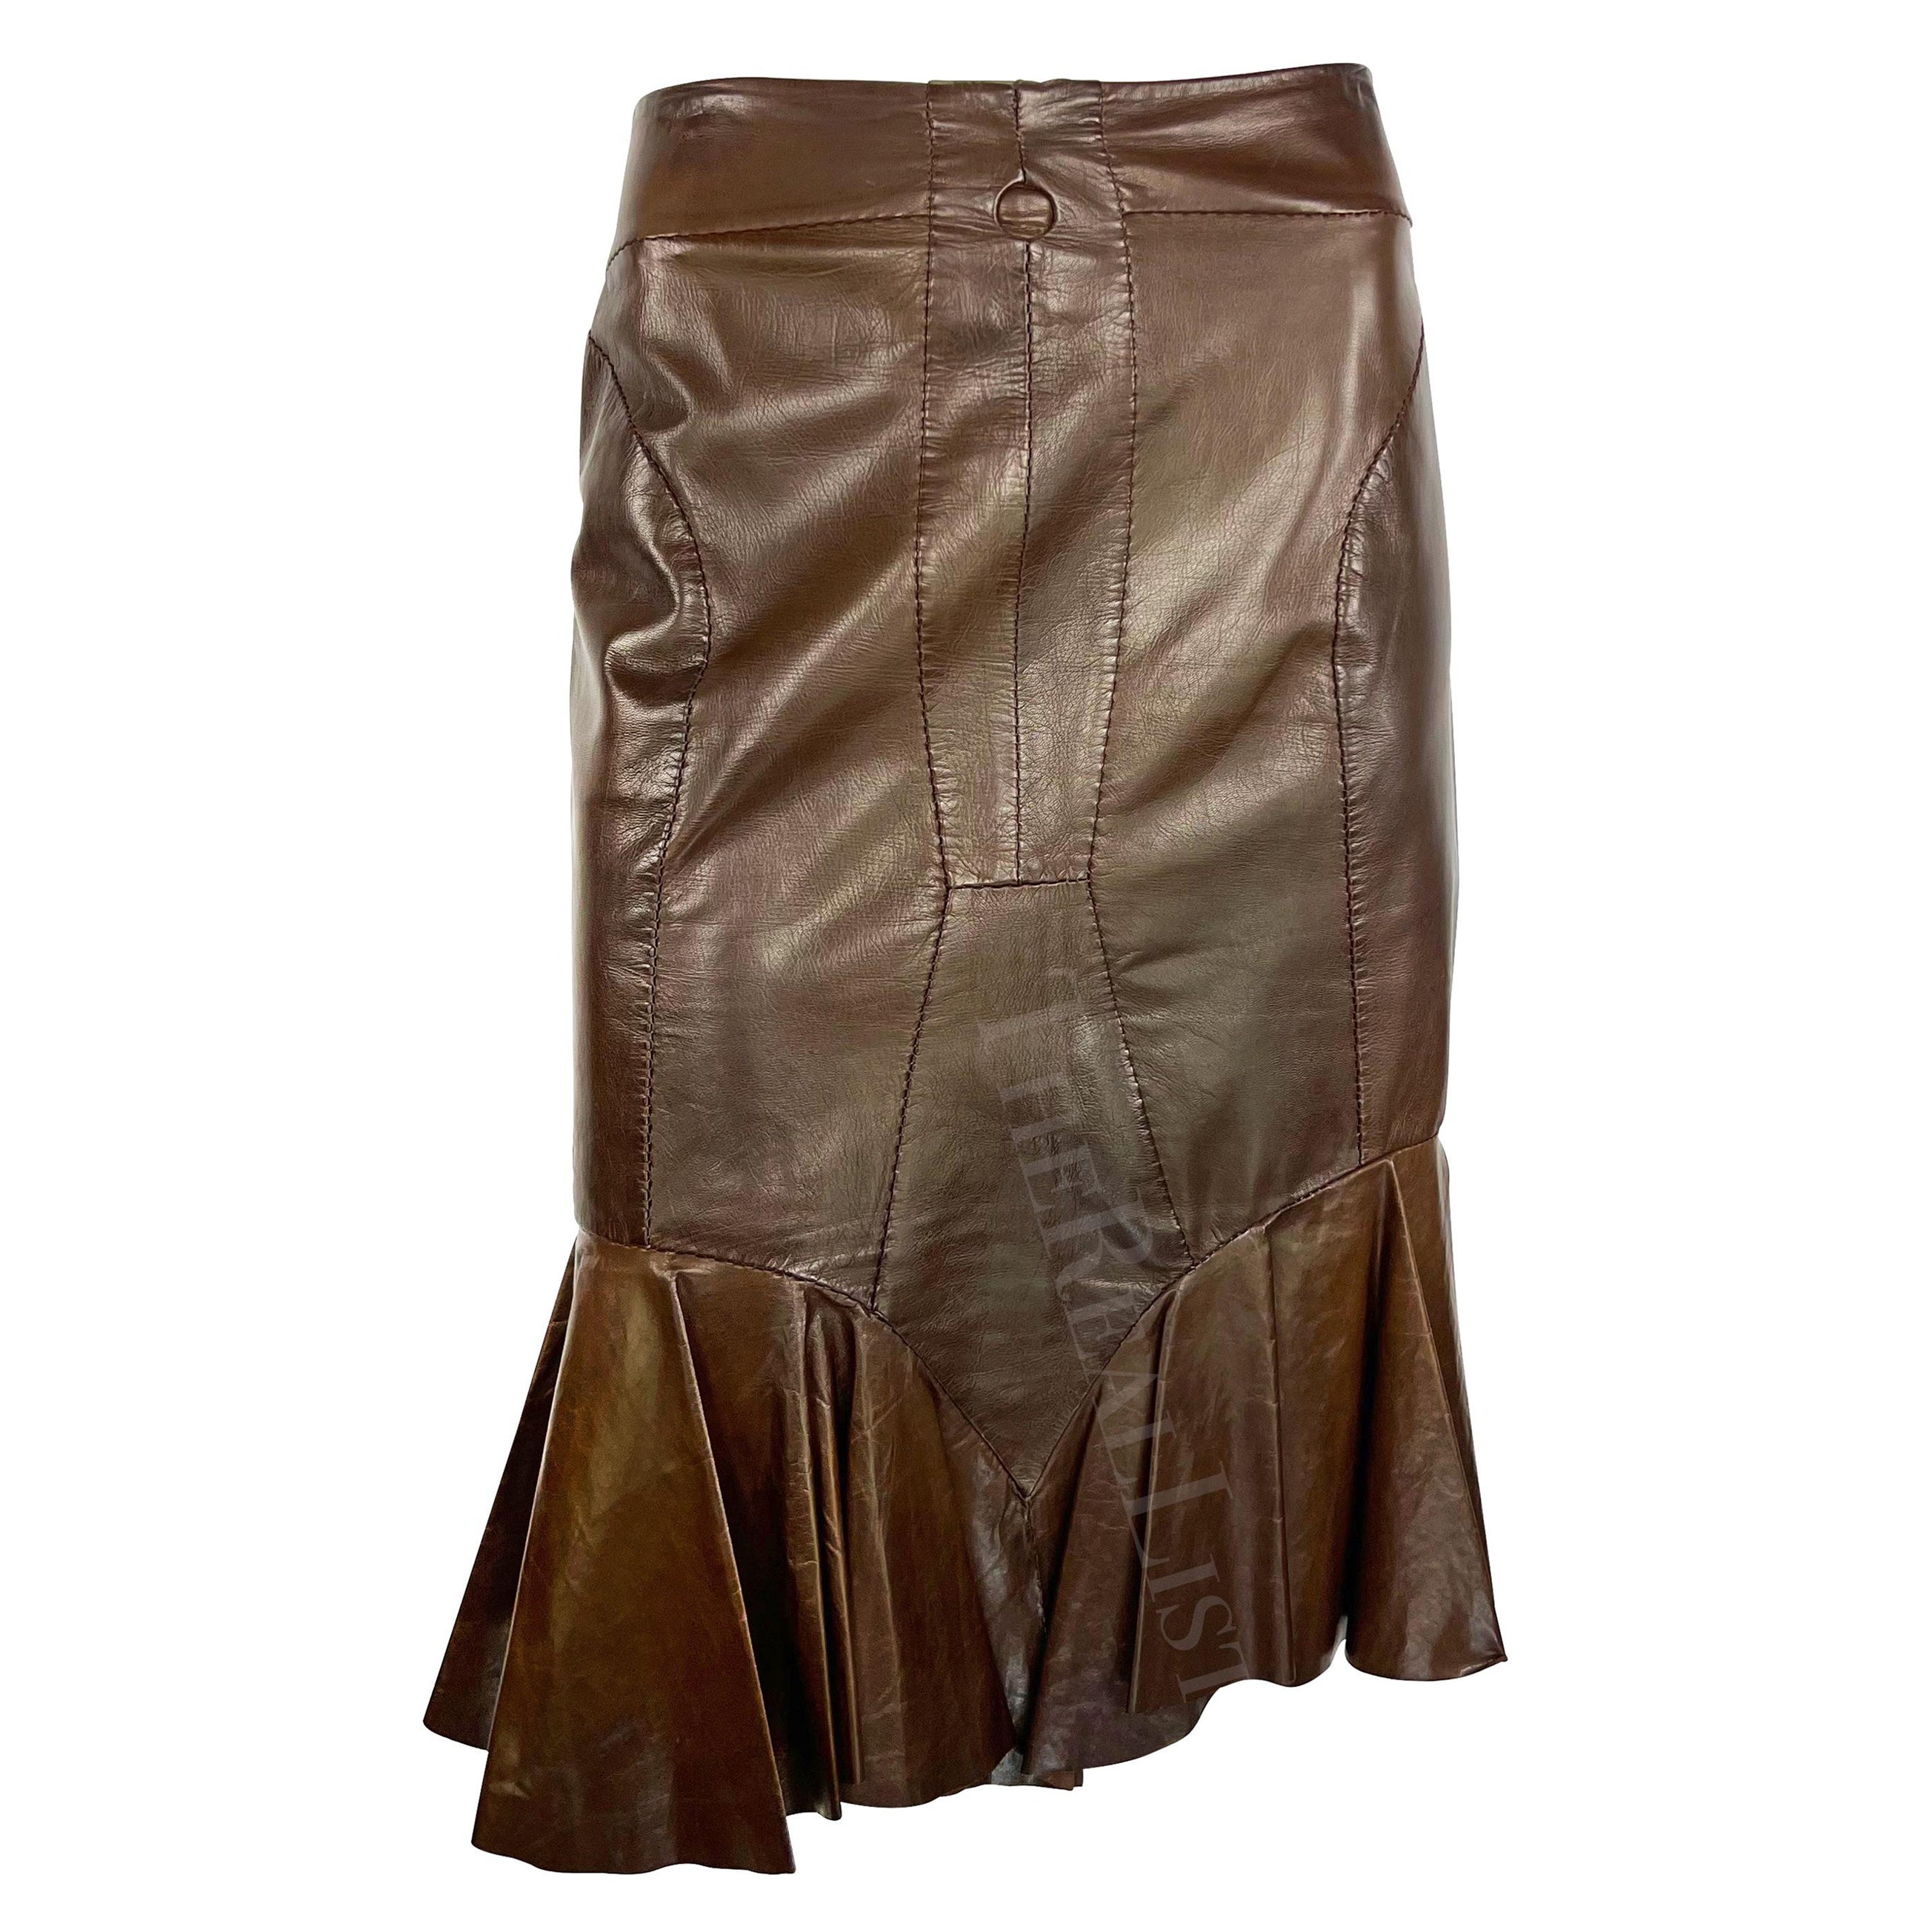 S/S 2003 Yves Saint Laurent by Tom Ford Anatomic Brown Leather Ruffle Skirt For Sale